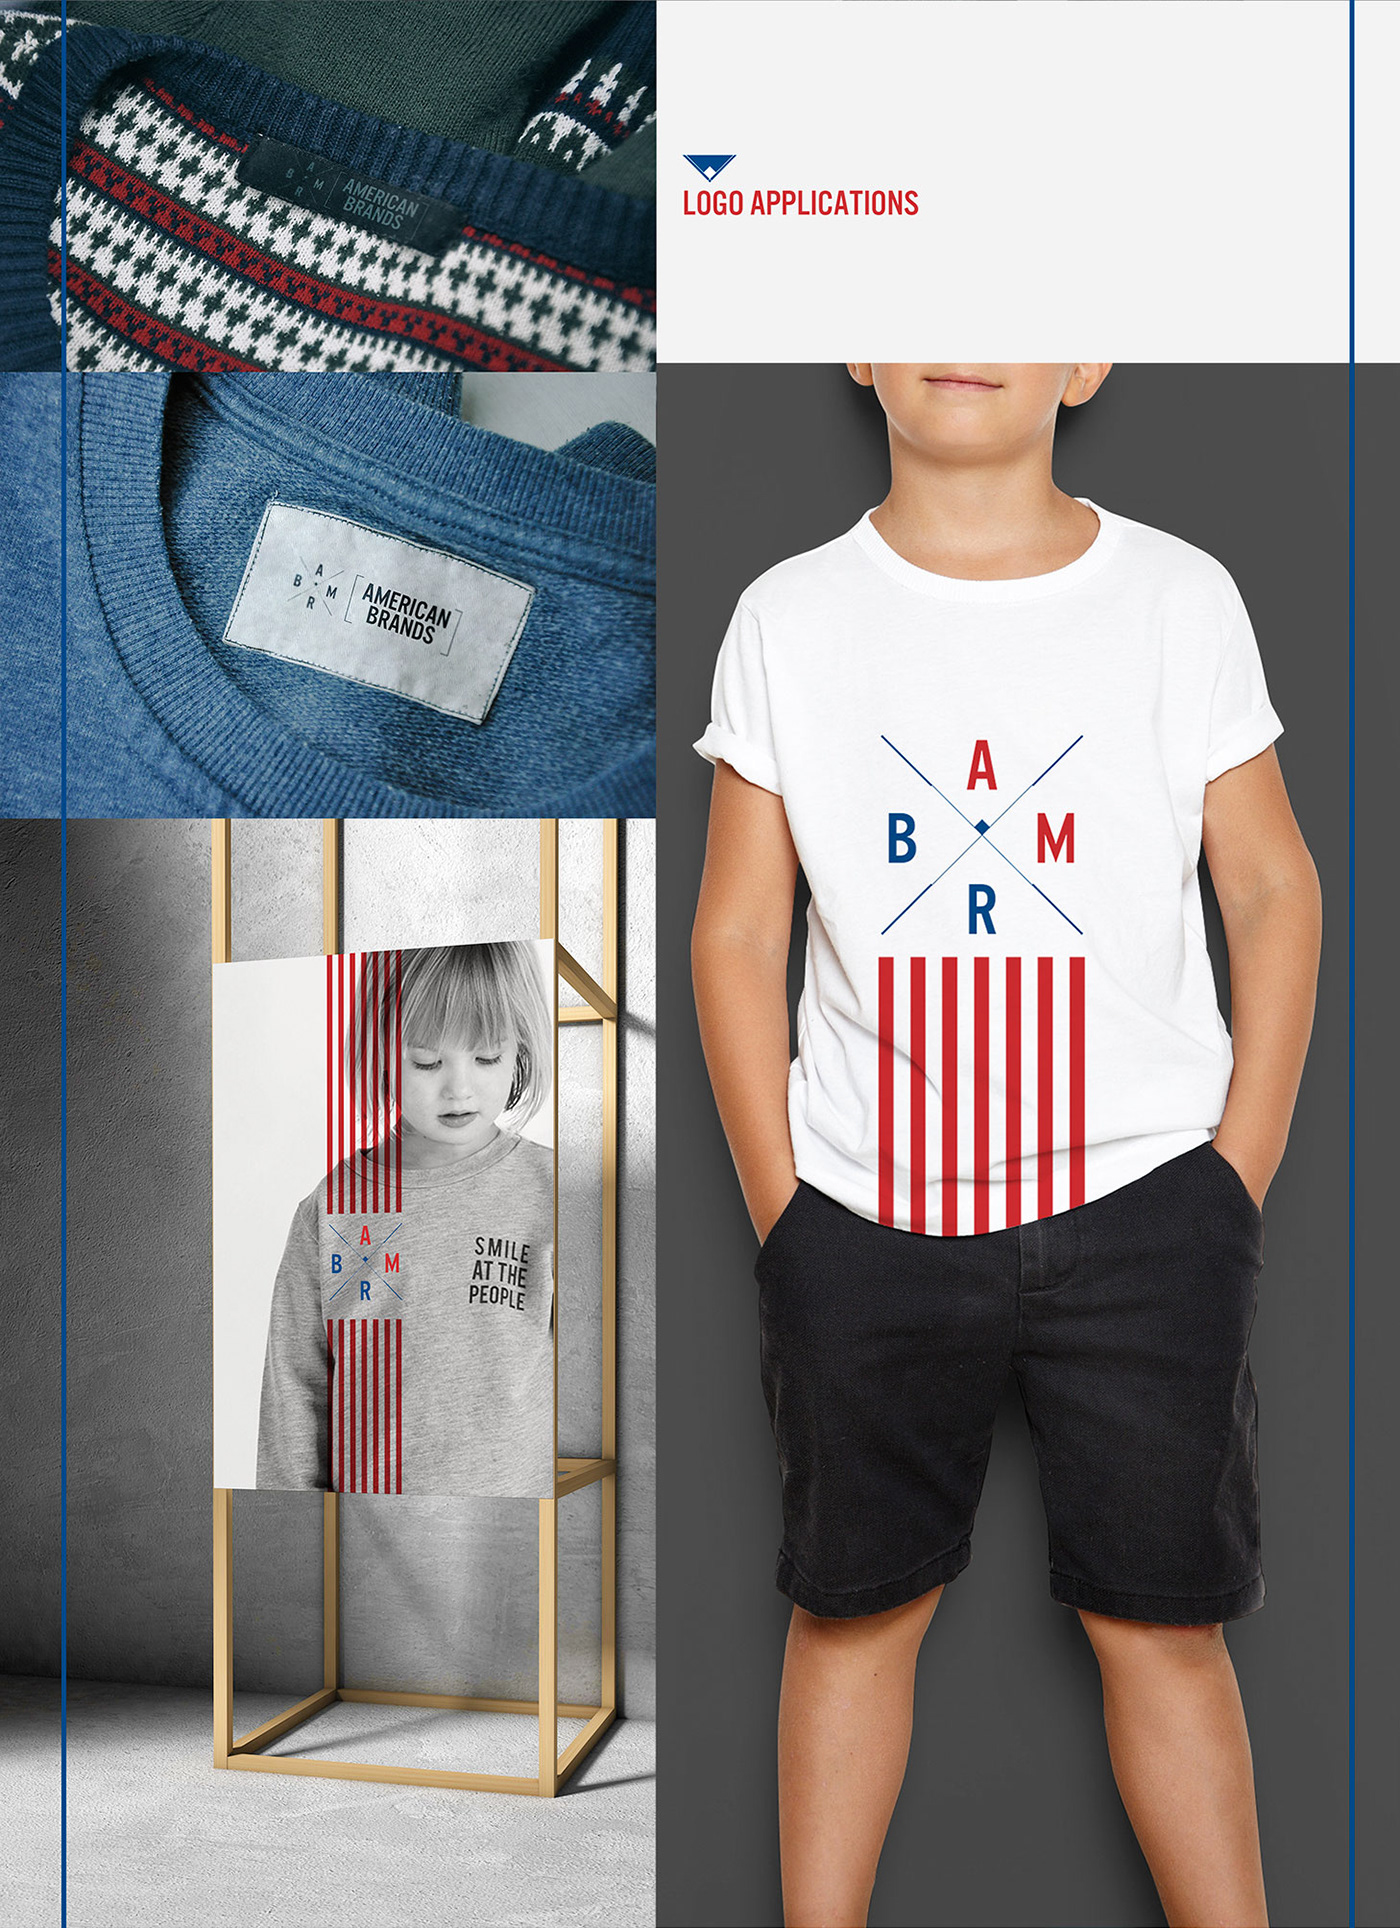 ameen Ameenyouns american brand branding  clothes graphicdesign logo